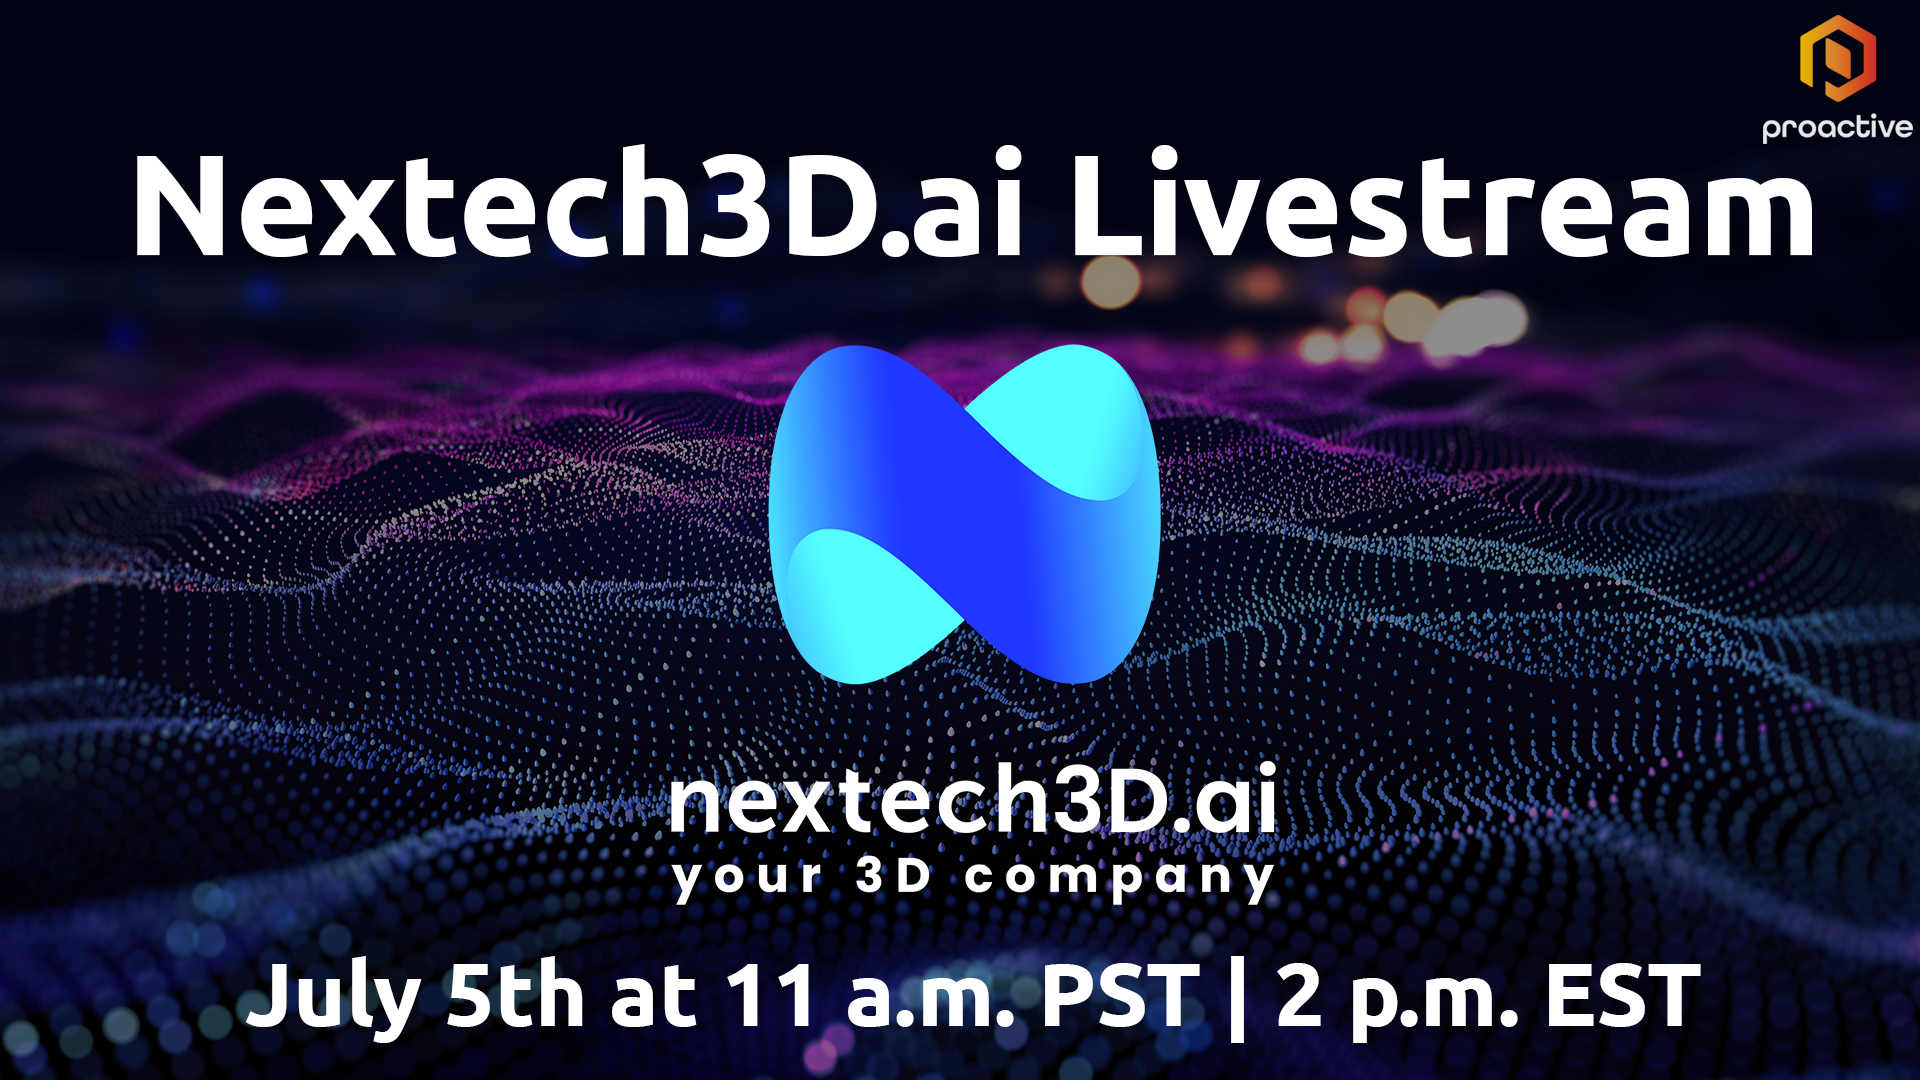 Nextech3D.ai, Tuesday, July 4, 2023, Press release picture